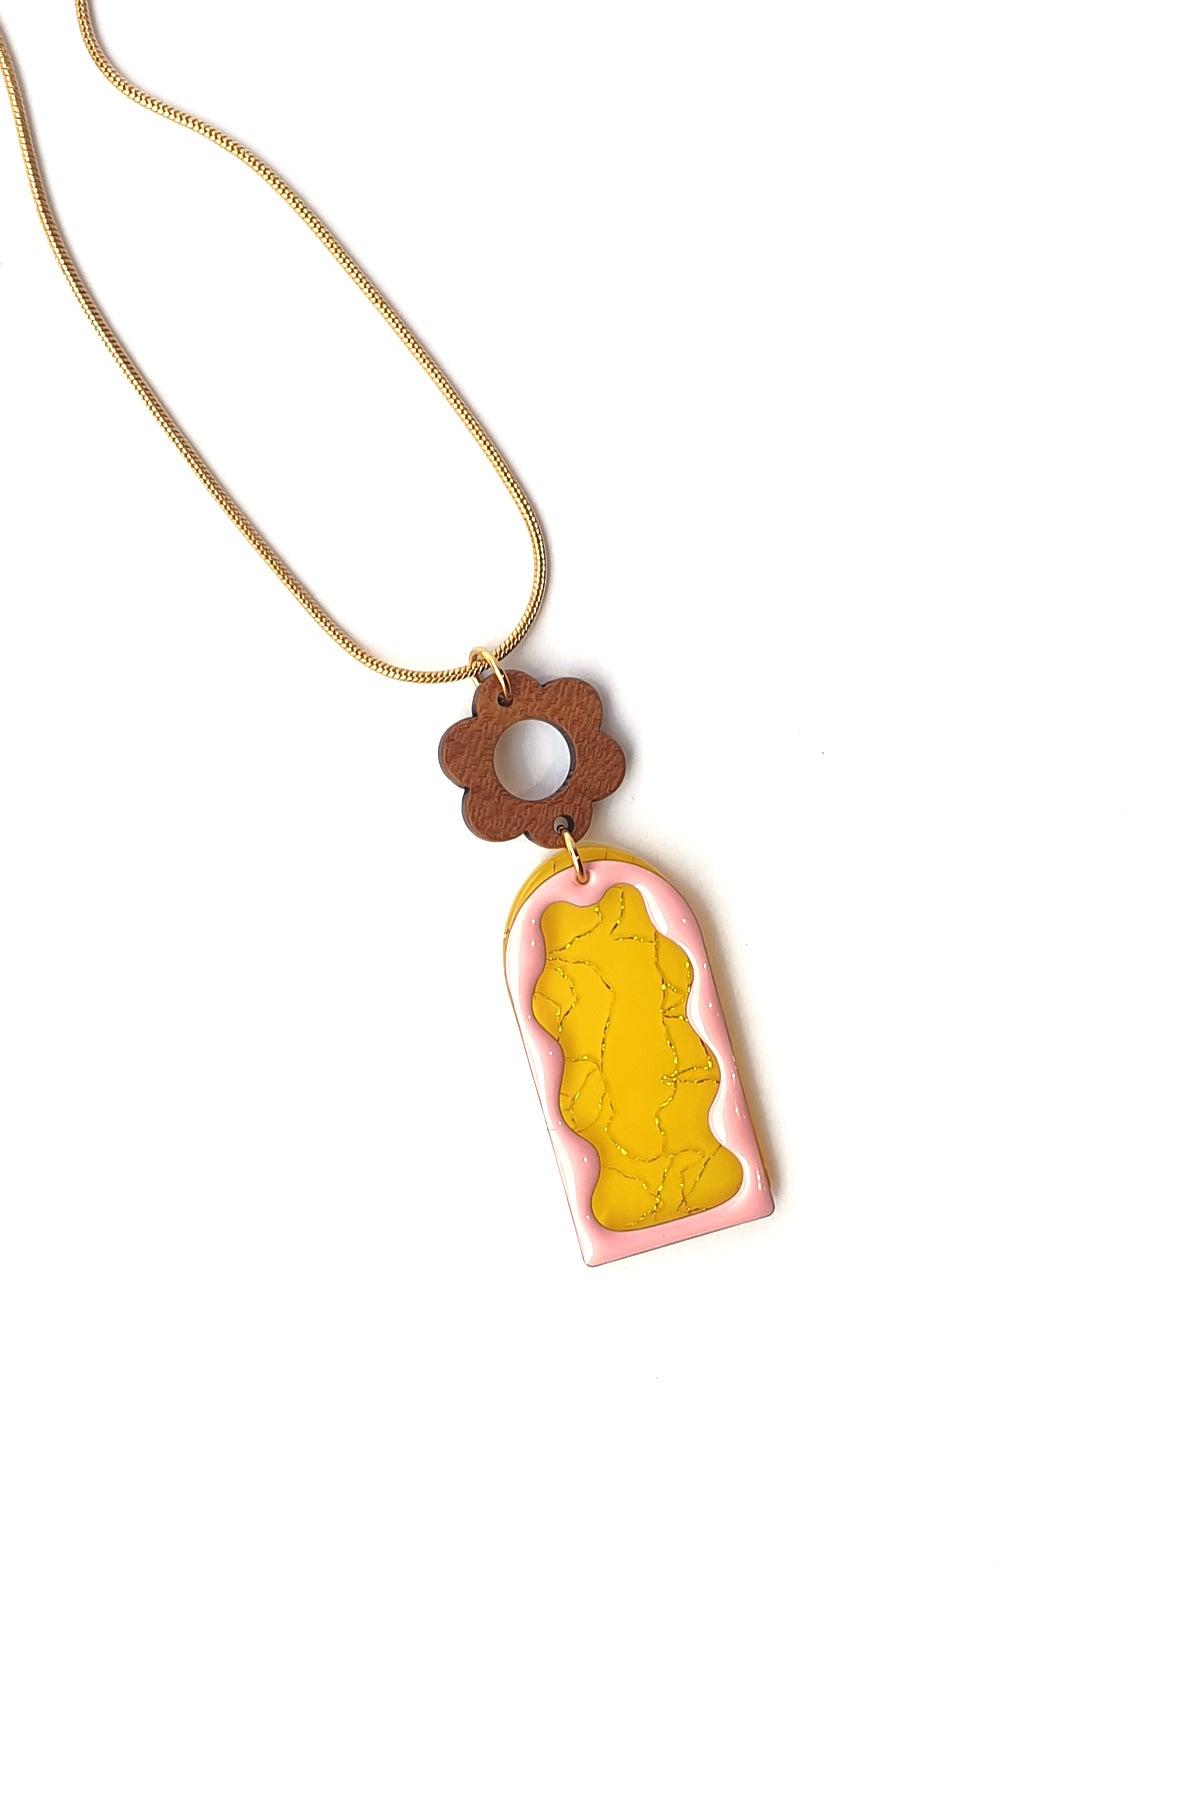 A necklace lays against a white background. It features a gold chain, a wooden flower top, followed by a yellow acrylic arch with silver thread detail overlaid by a pink acrylic wavy arch frame.